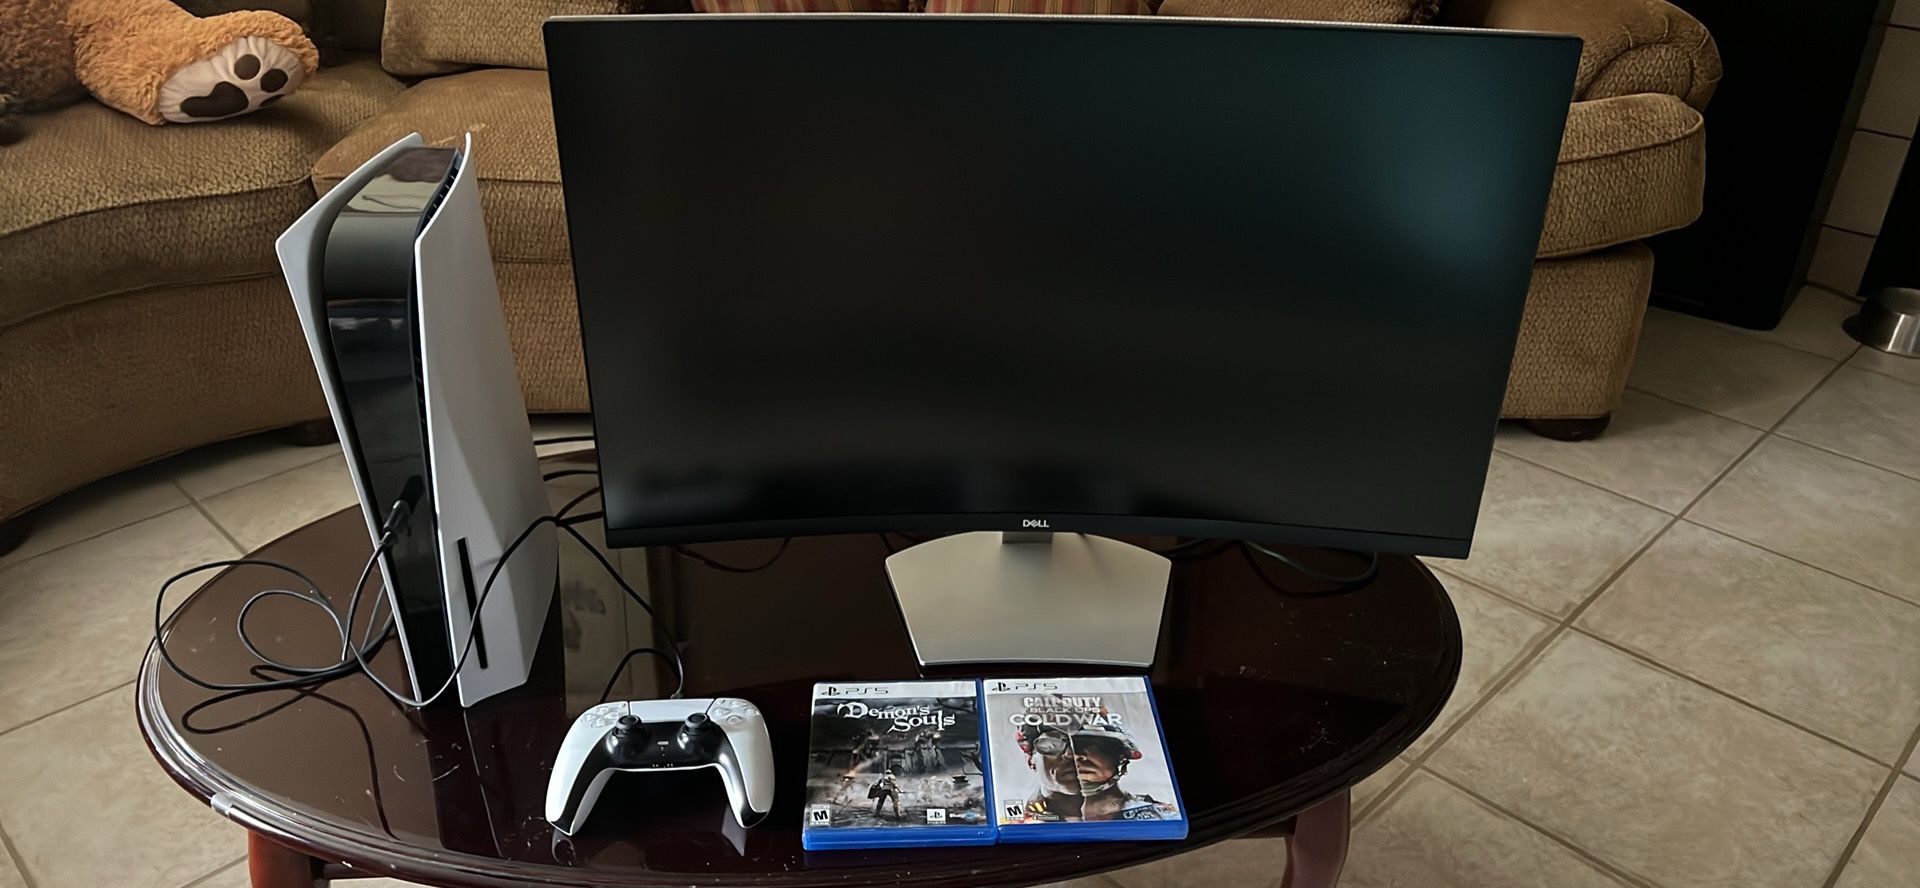 Ps5 and monitor +2 games